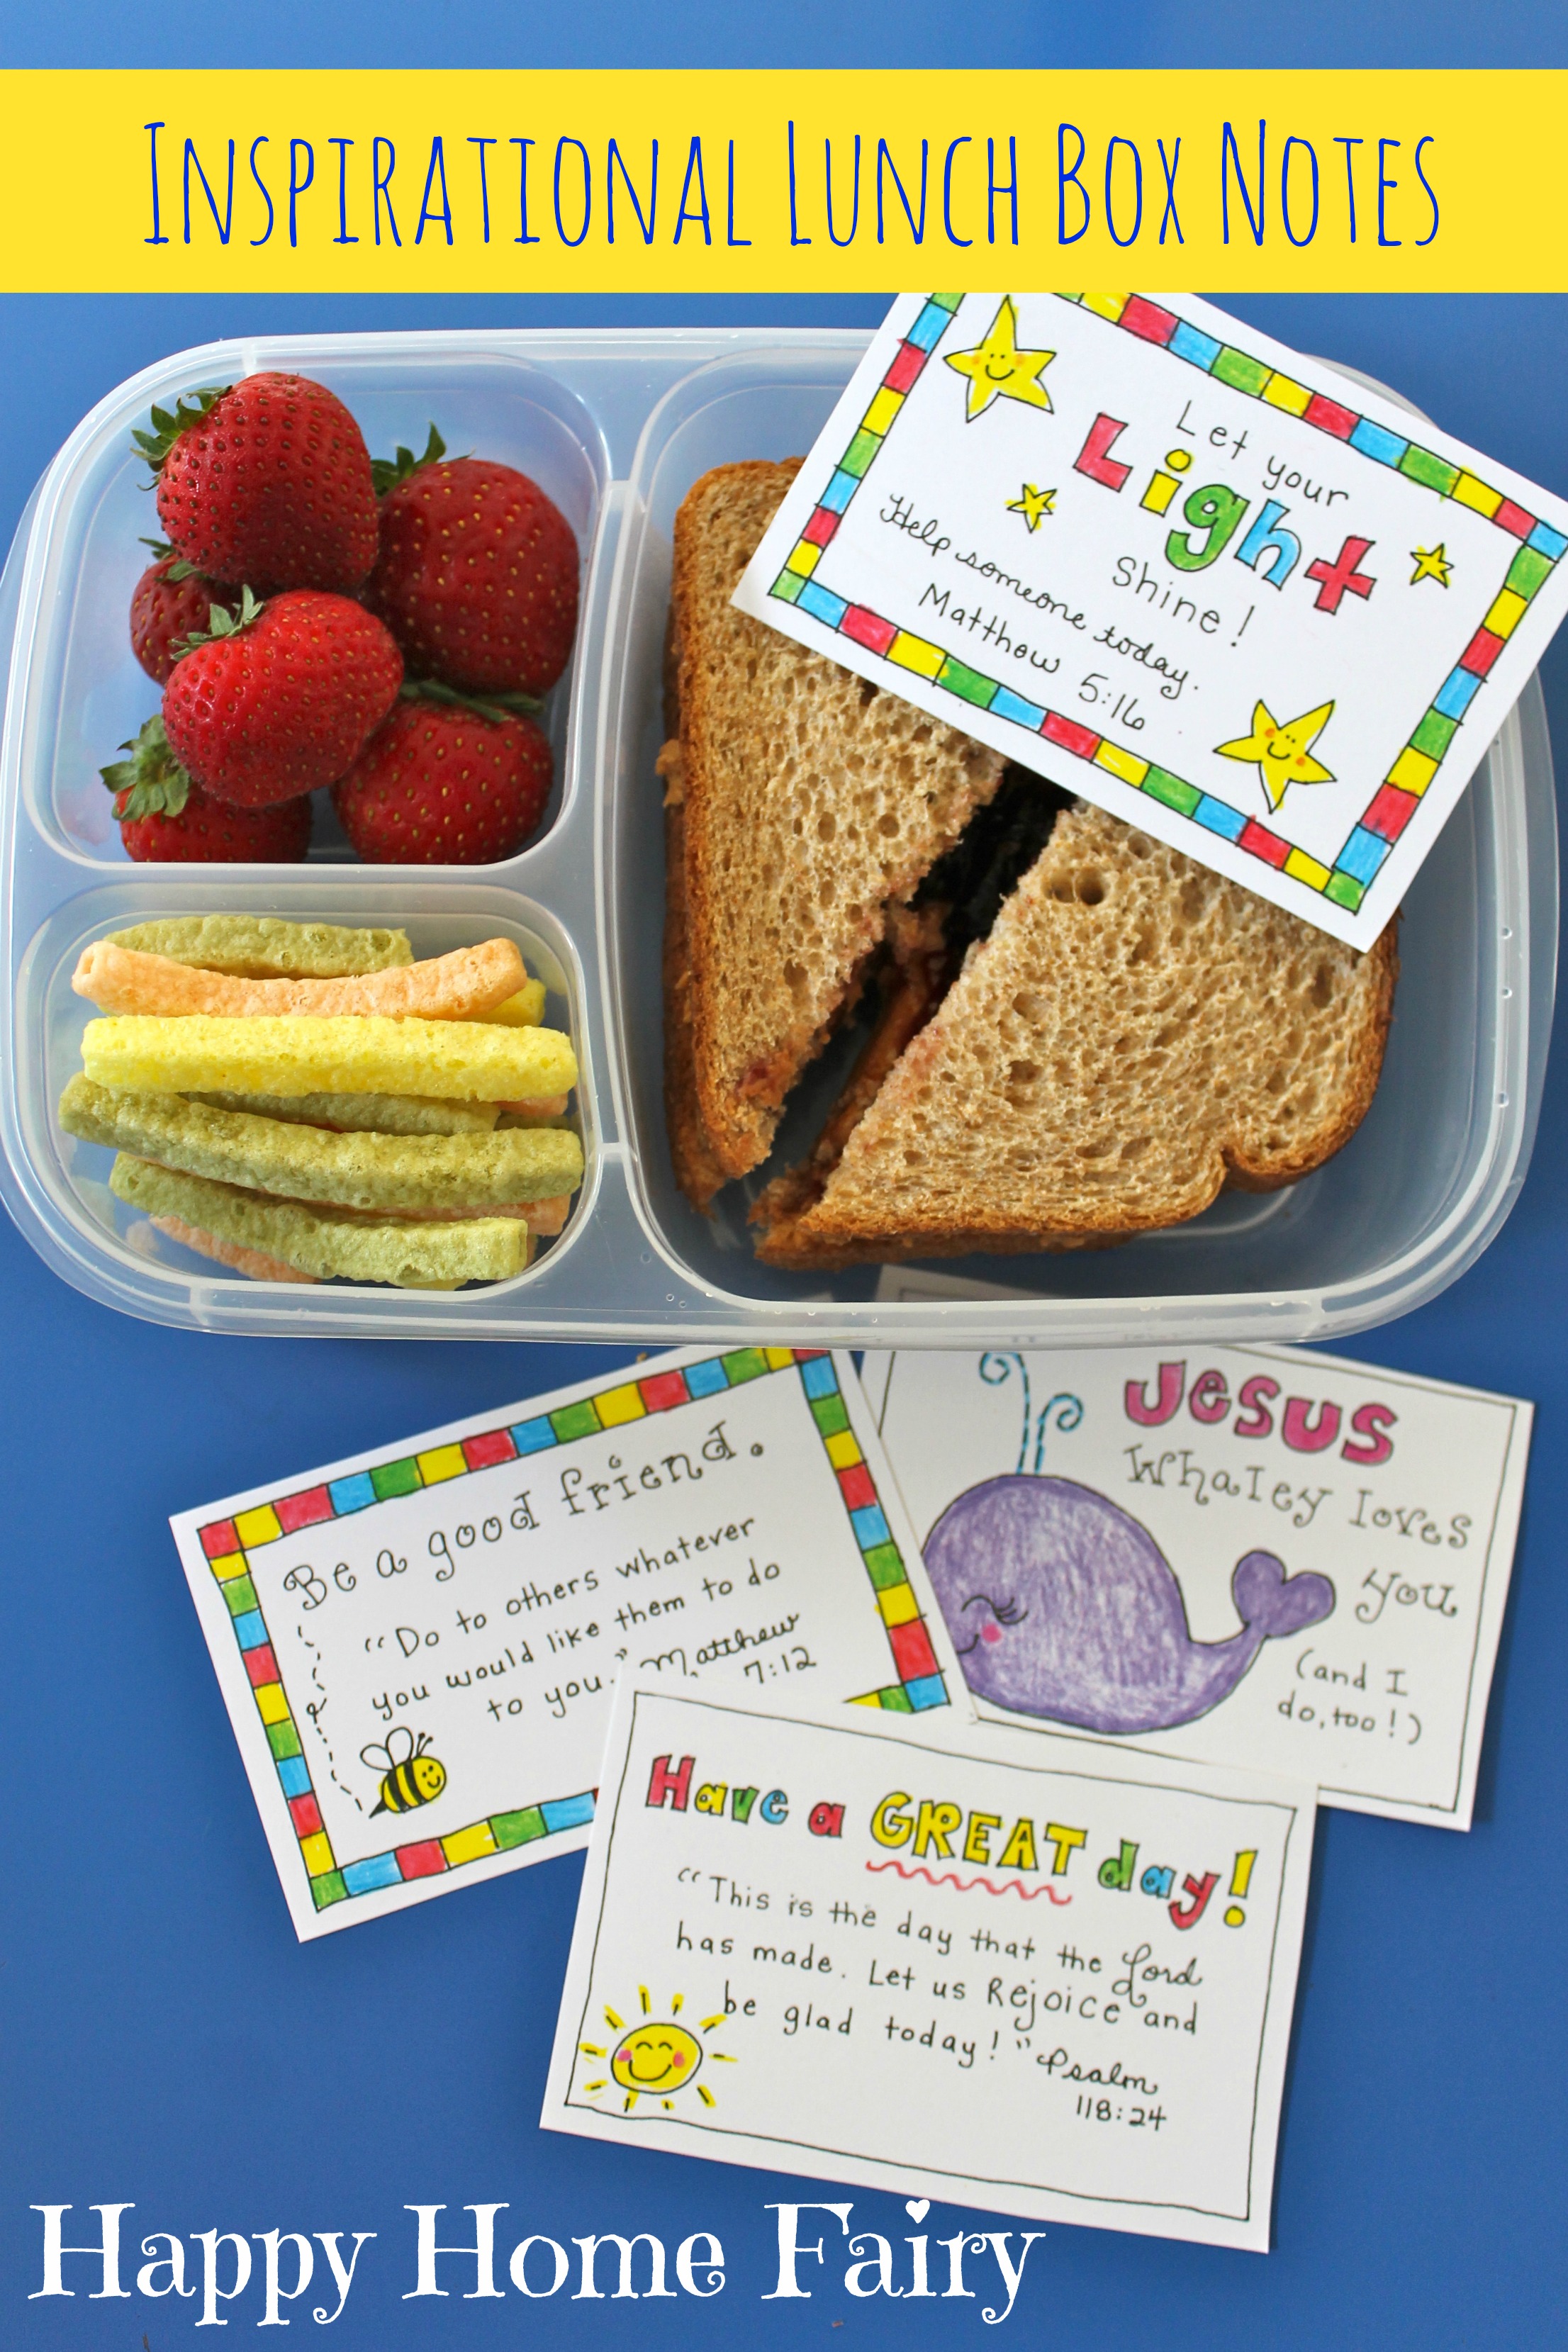 encouraging lunch box notes printable